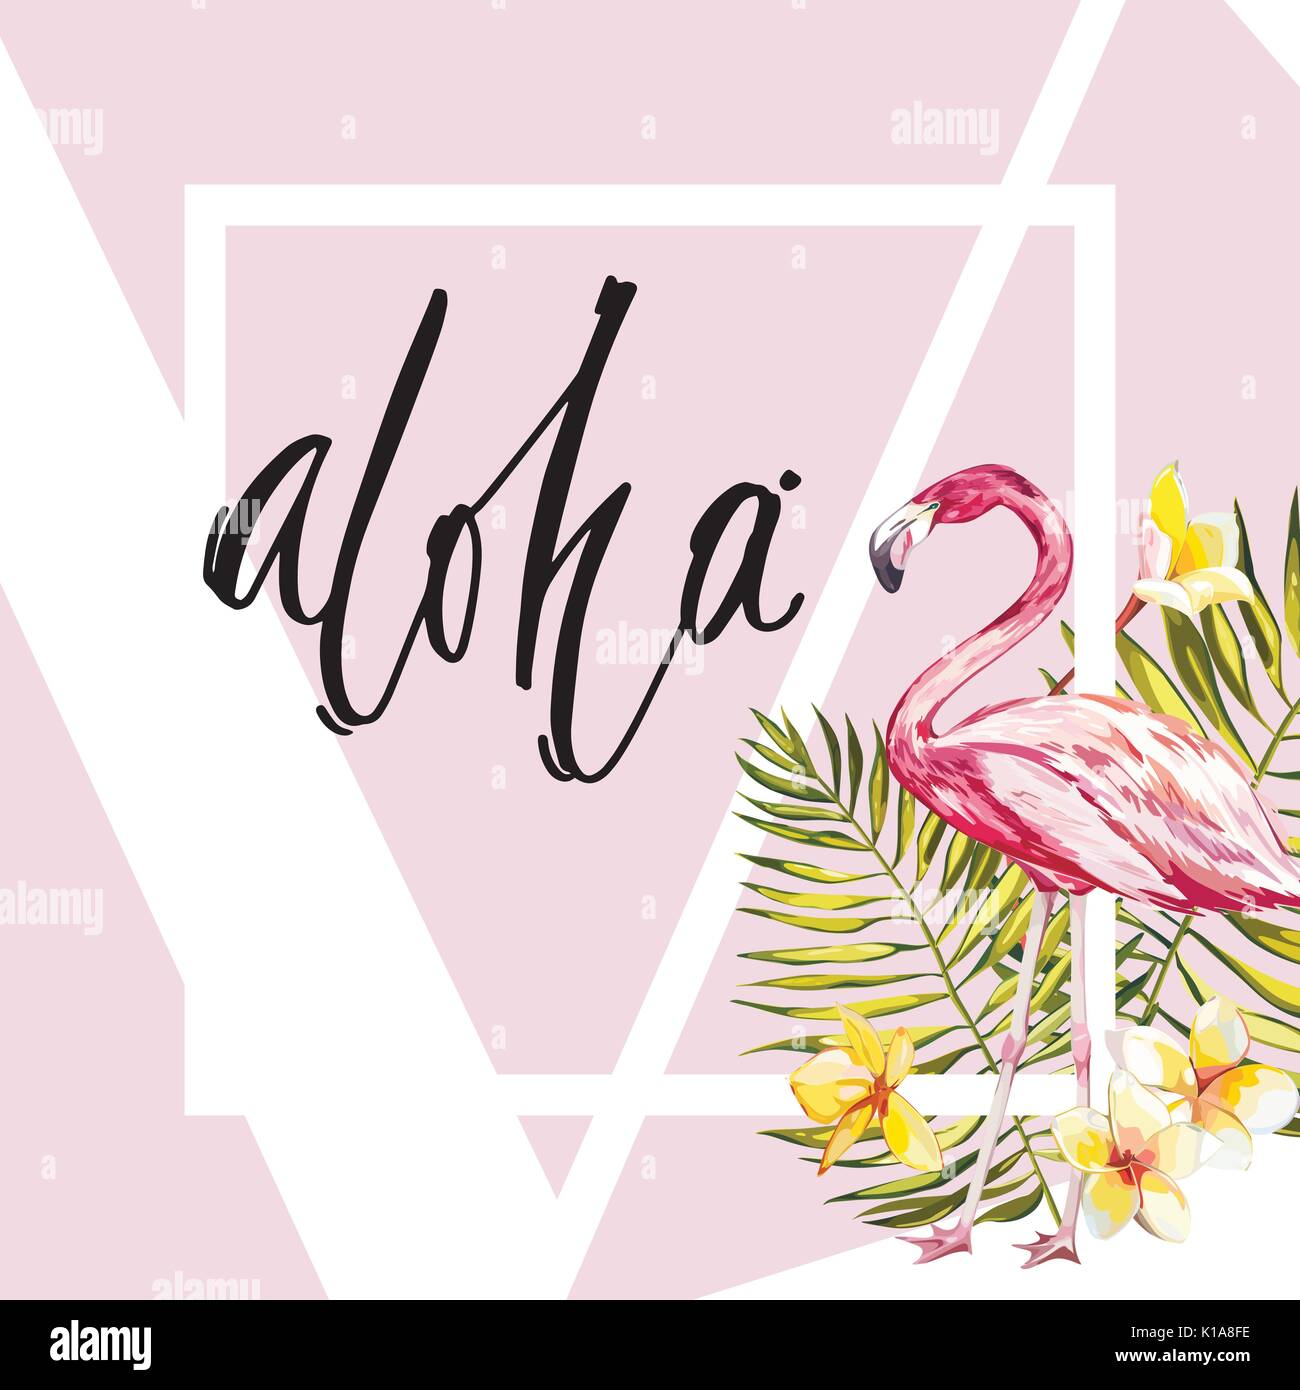 Banner, poster with flamingo, palm leaves, jungle leaf. Beautiful vector floral tropical summer background. Lettering composition - Aloha. EPS 10 Stock Vector